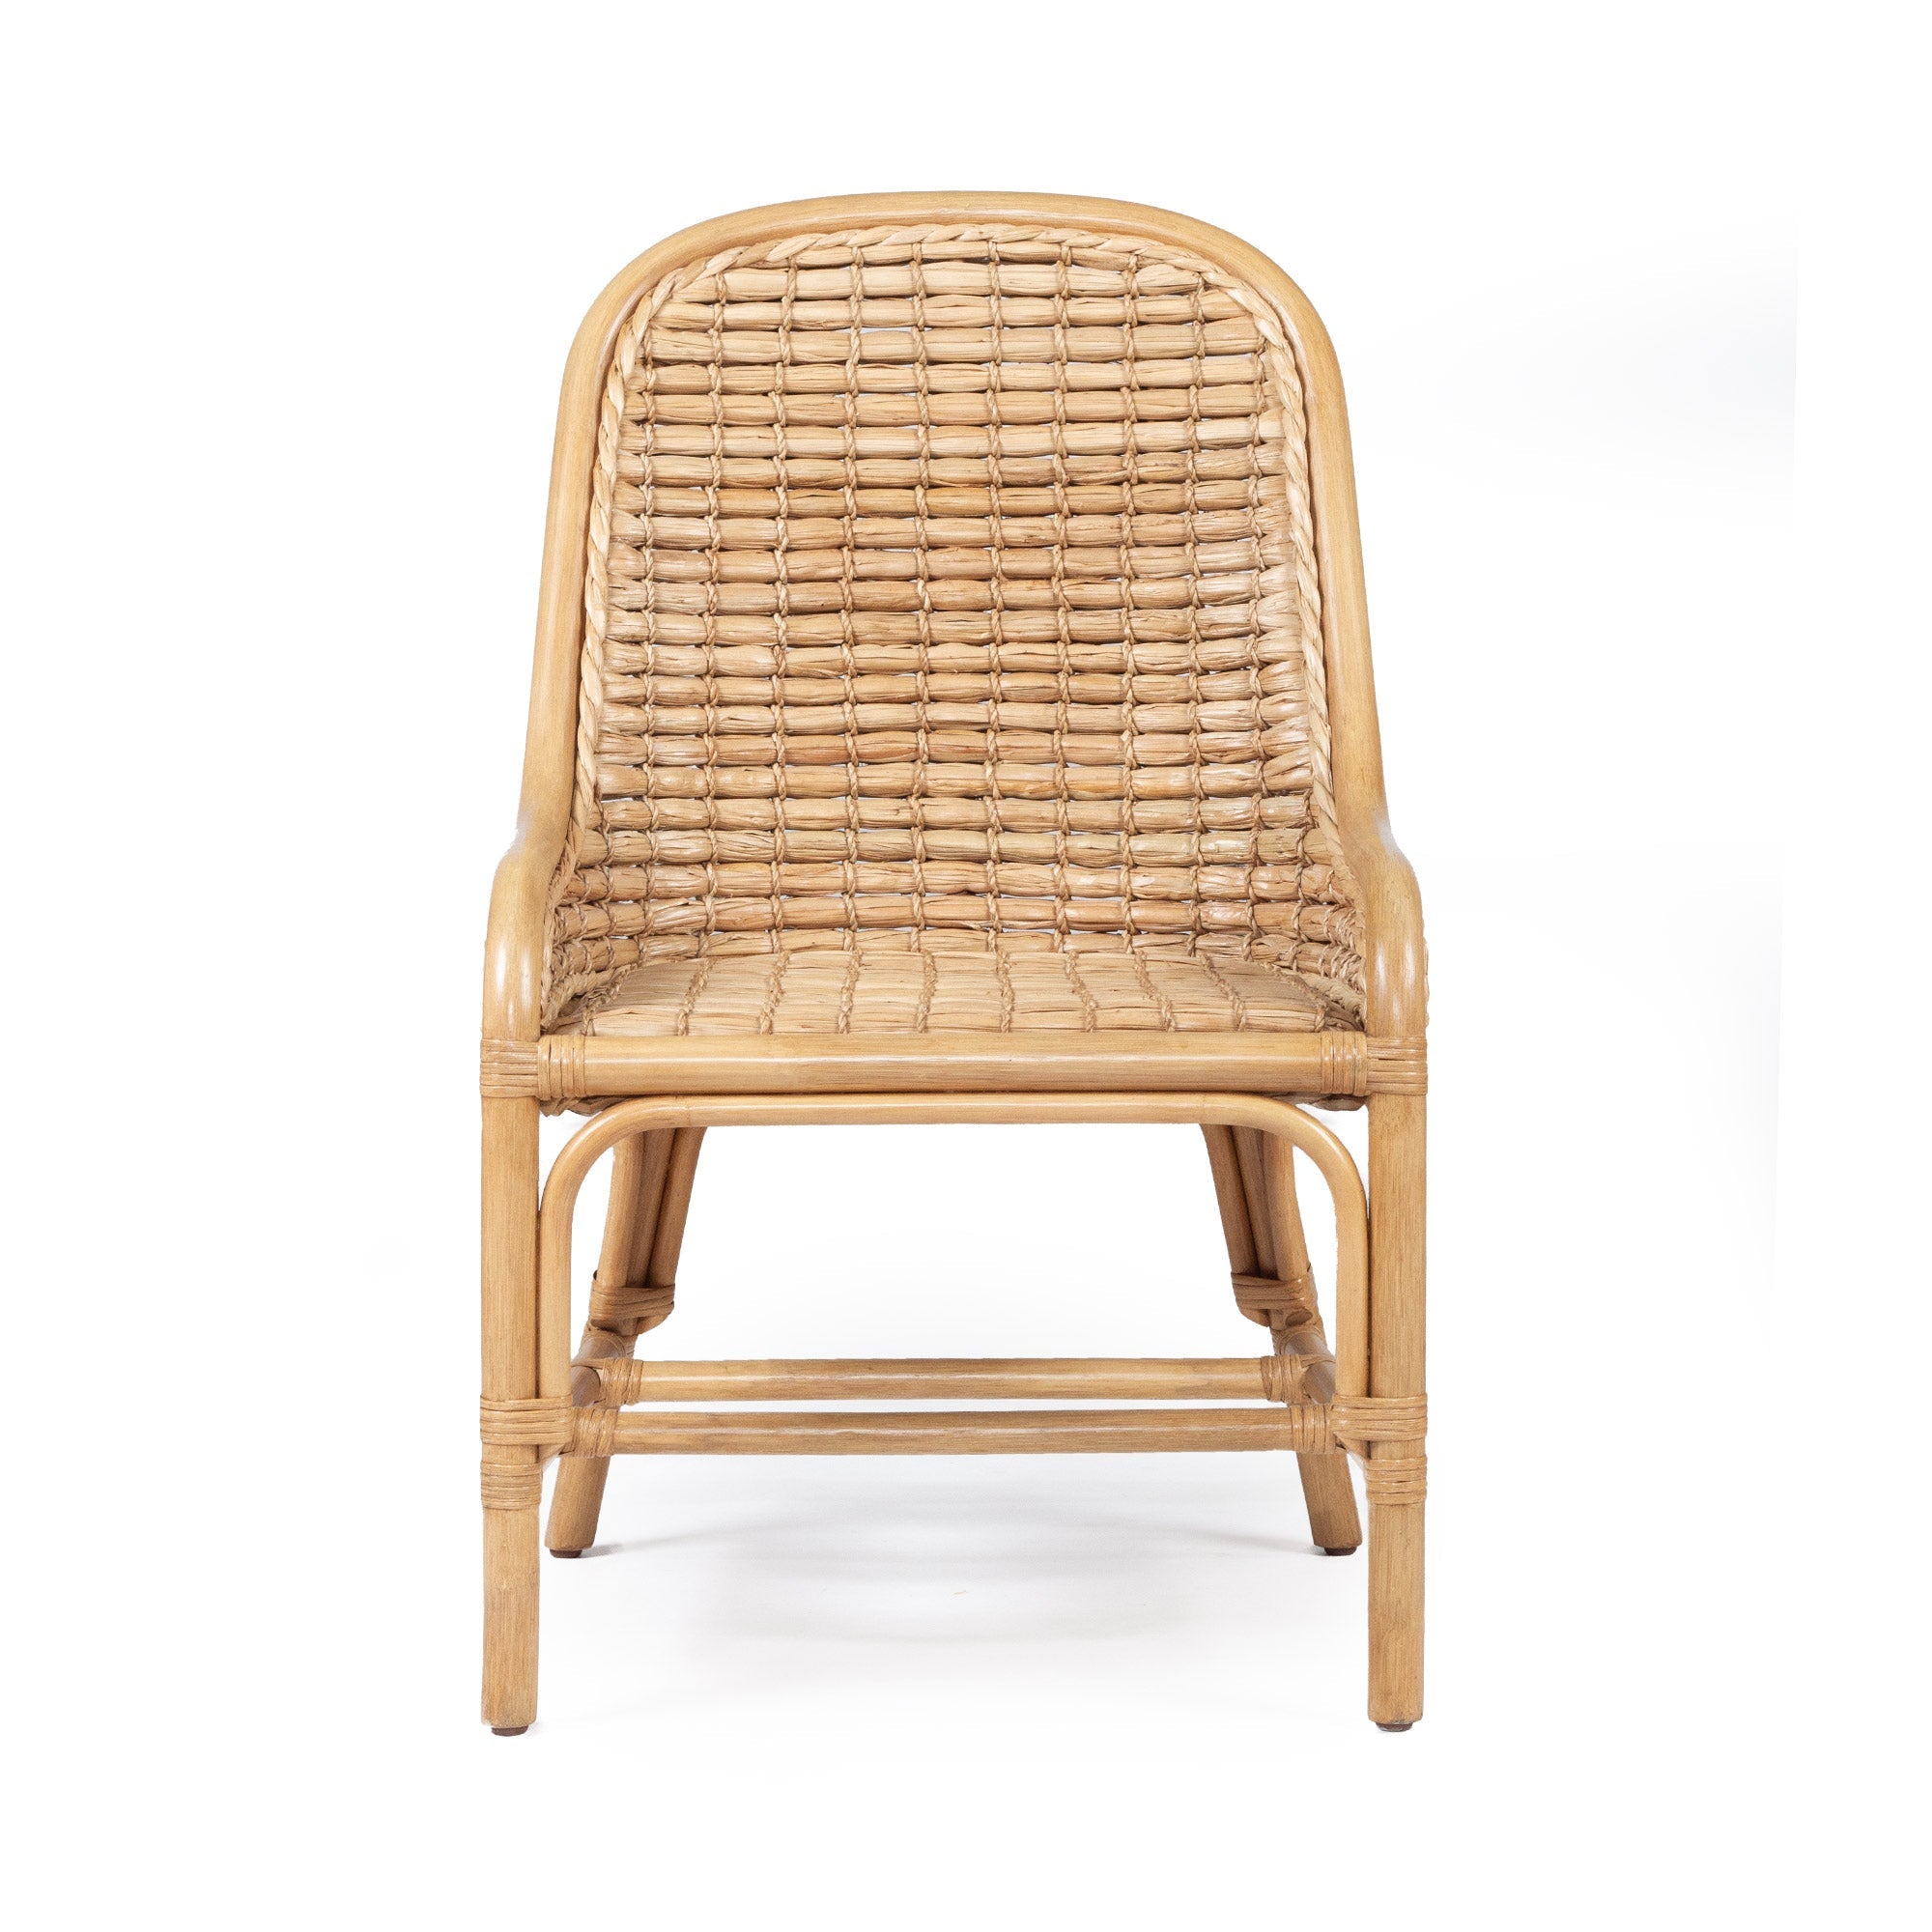 Castello Rattan Dining Chair - Natural - Notbrand